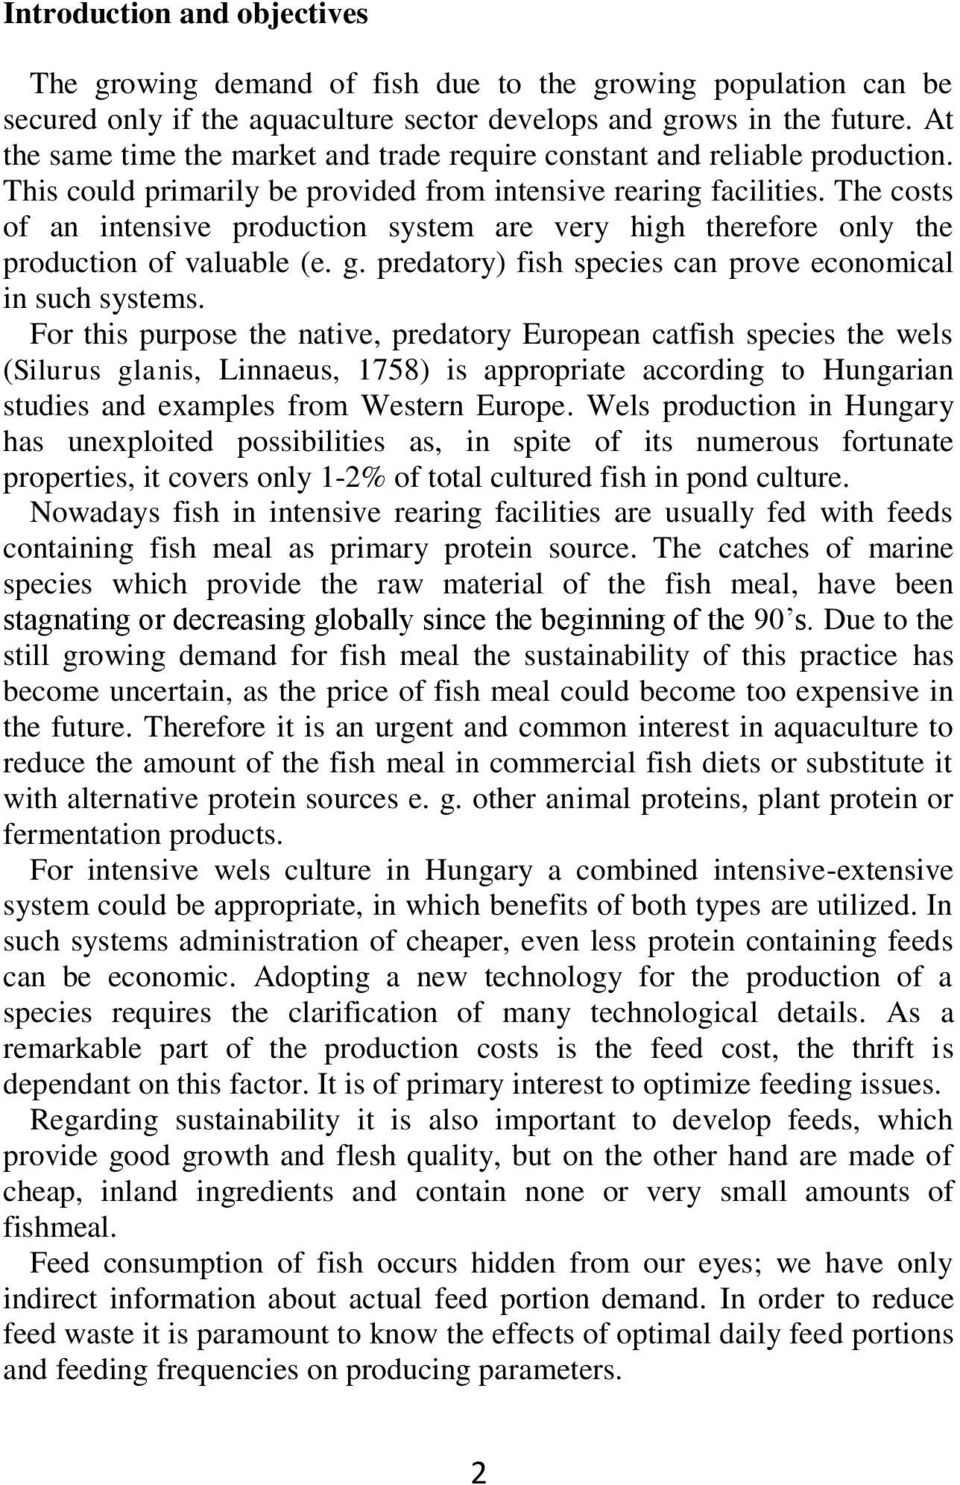 The costs of n intensive production system re very high therefore only the production of vlule (e. g. predtory) fish species cn prove economicl in such systems.